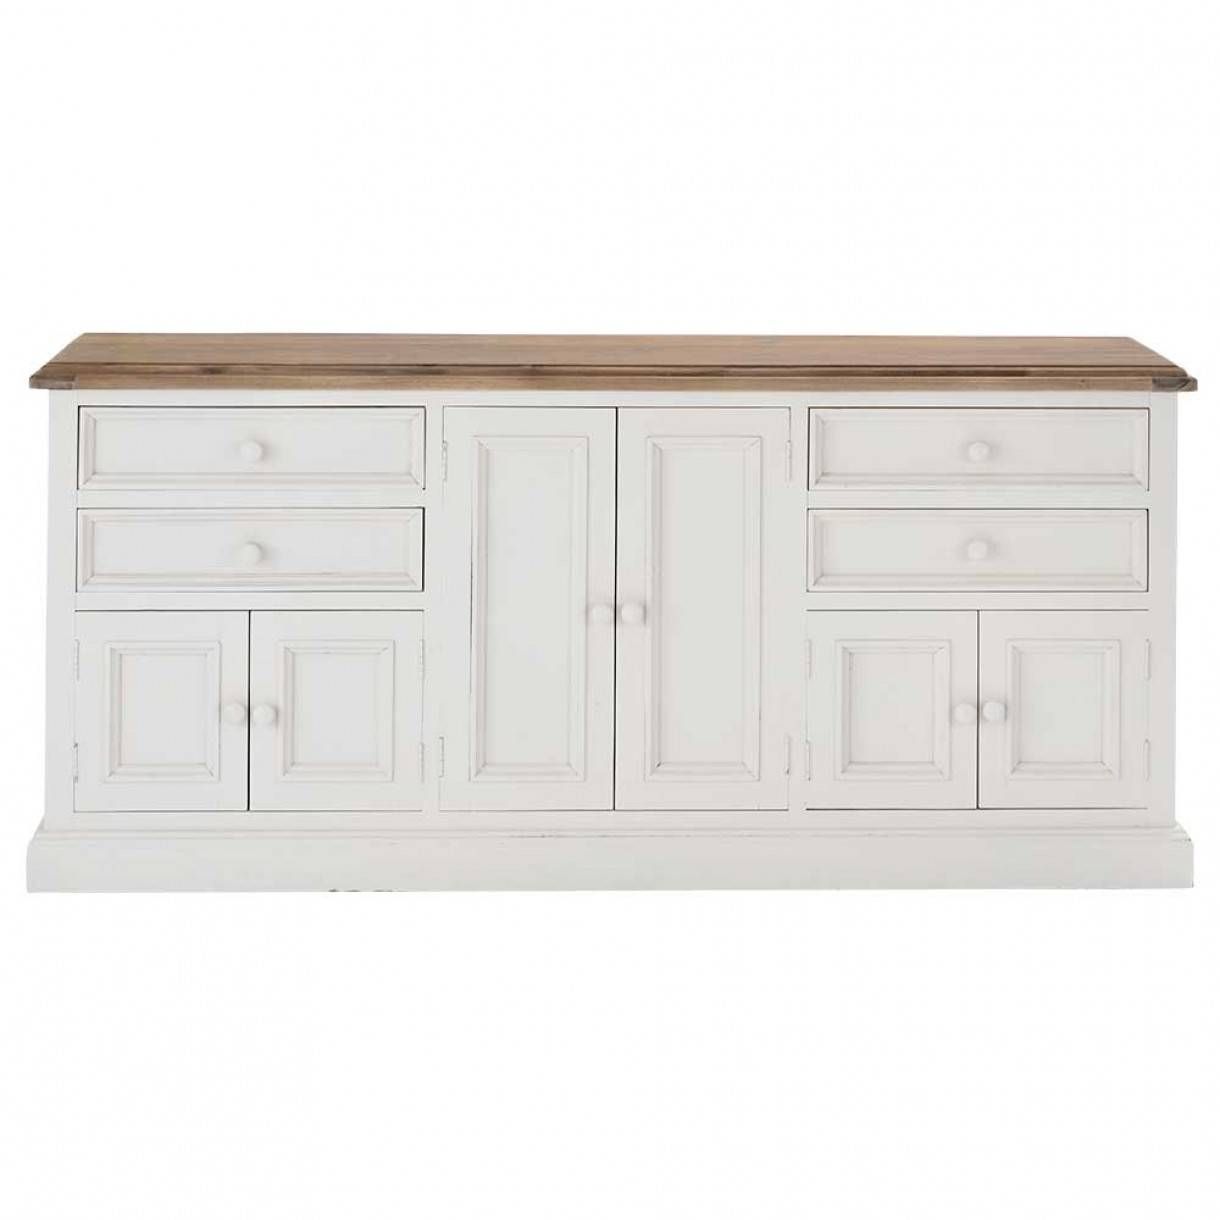 Buy Buffets And Sideboards Online | Dining | Early Settler Furniture Inside Large Buffets And Sideboards (Photo 6 of 20)